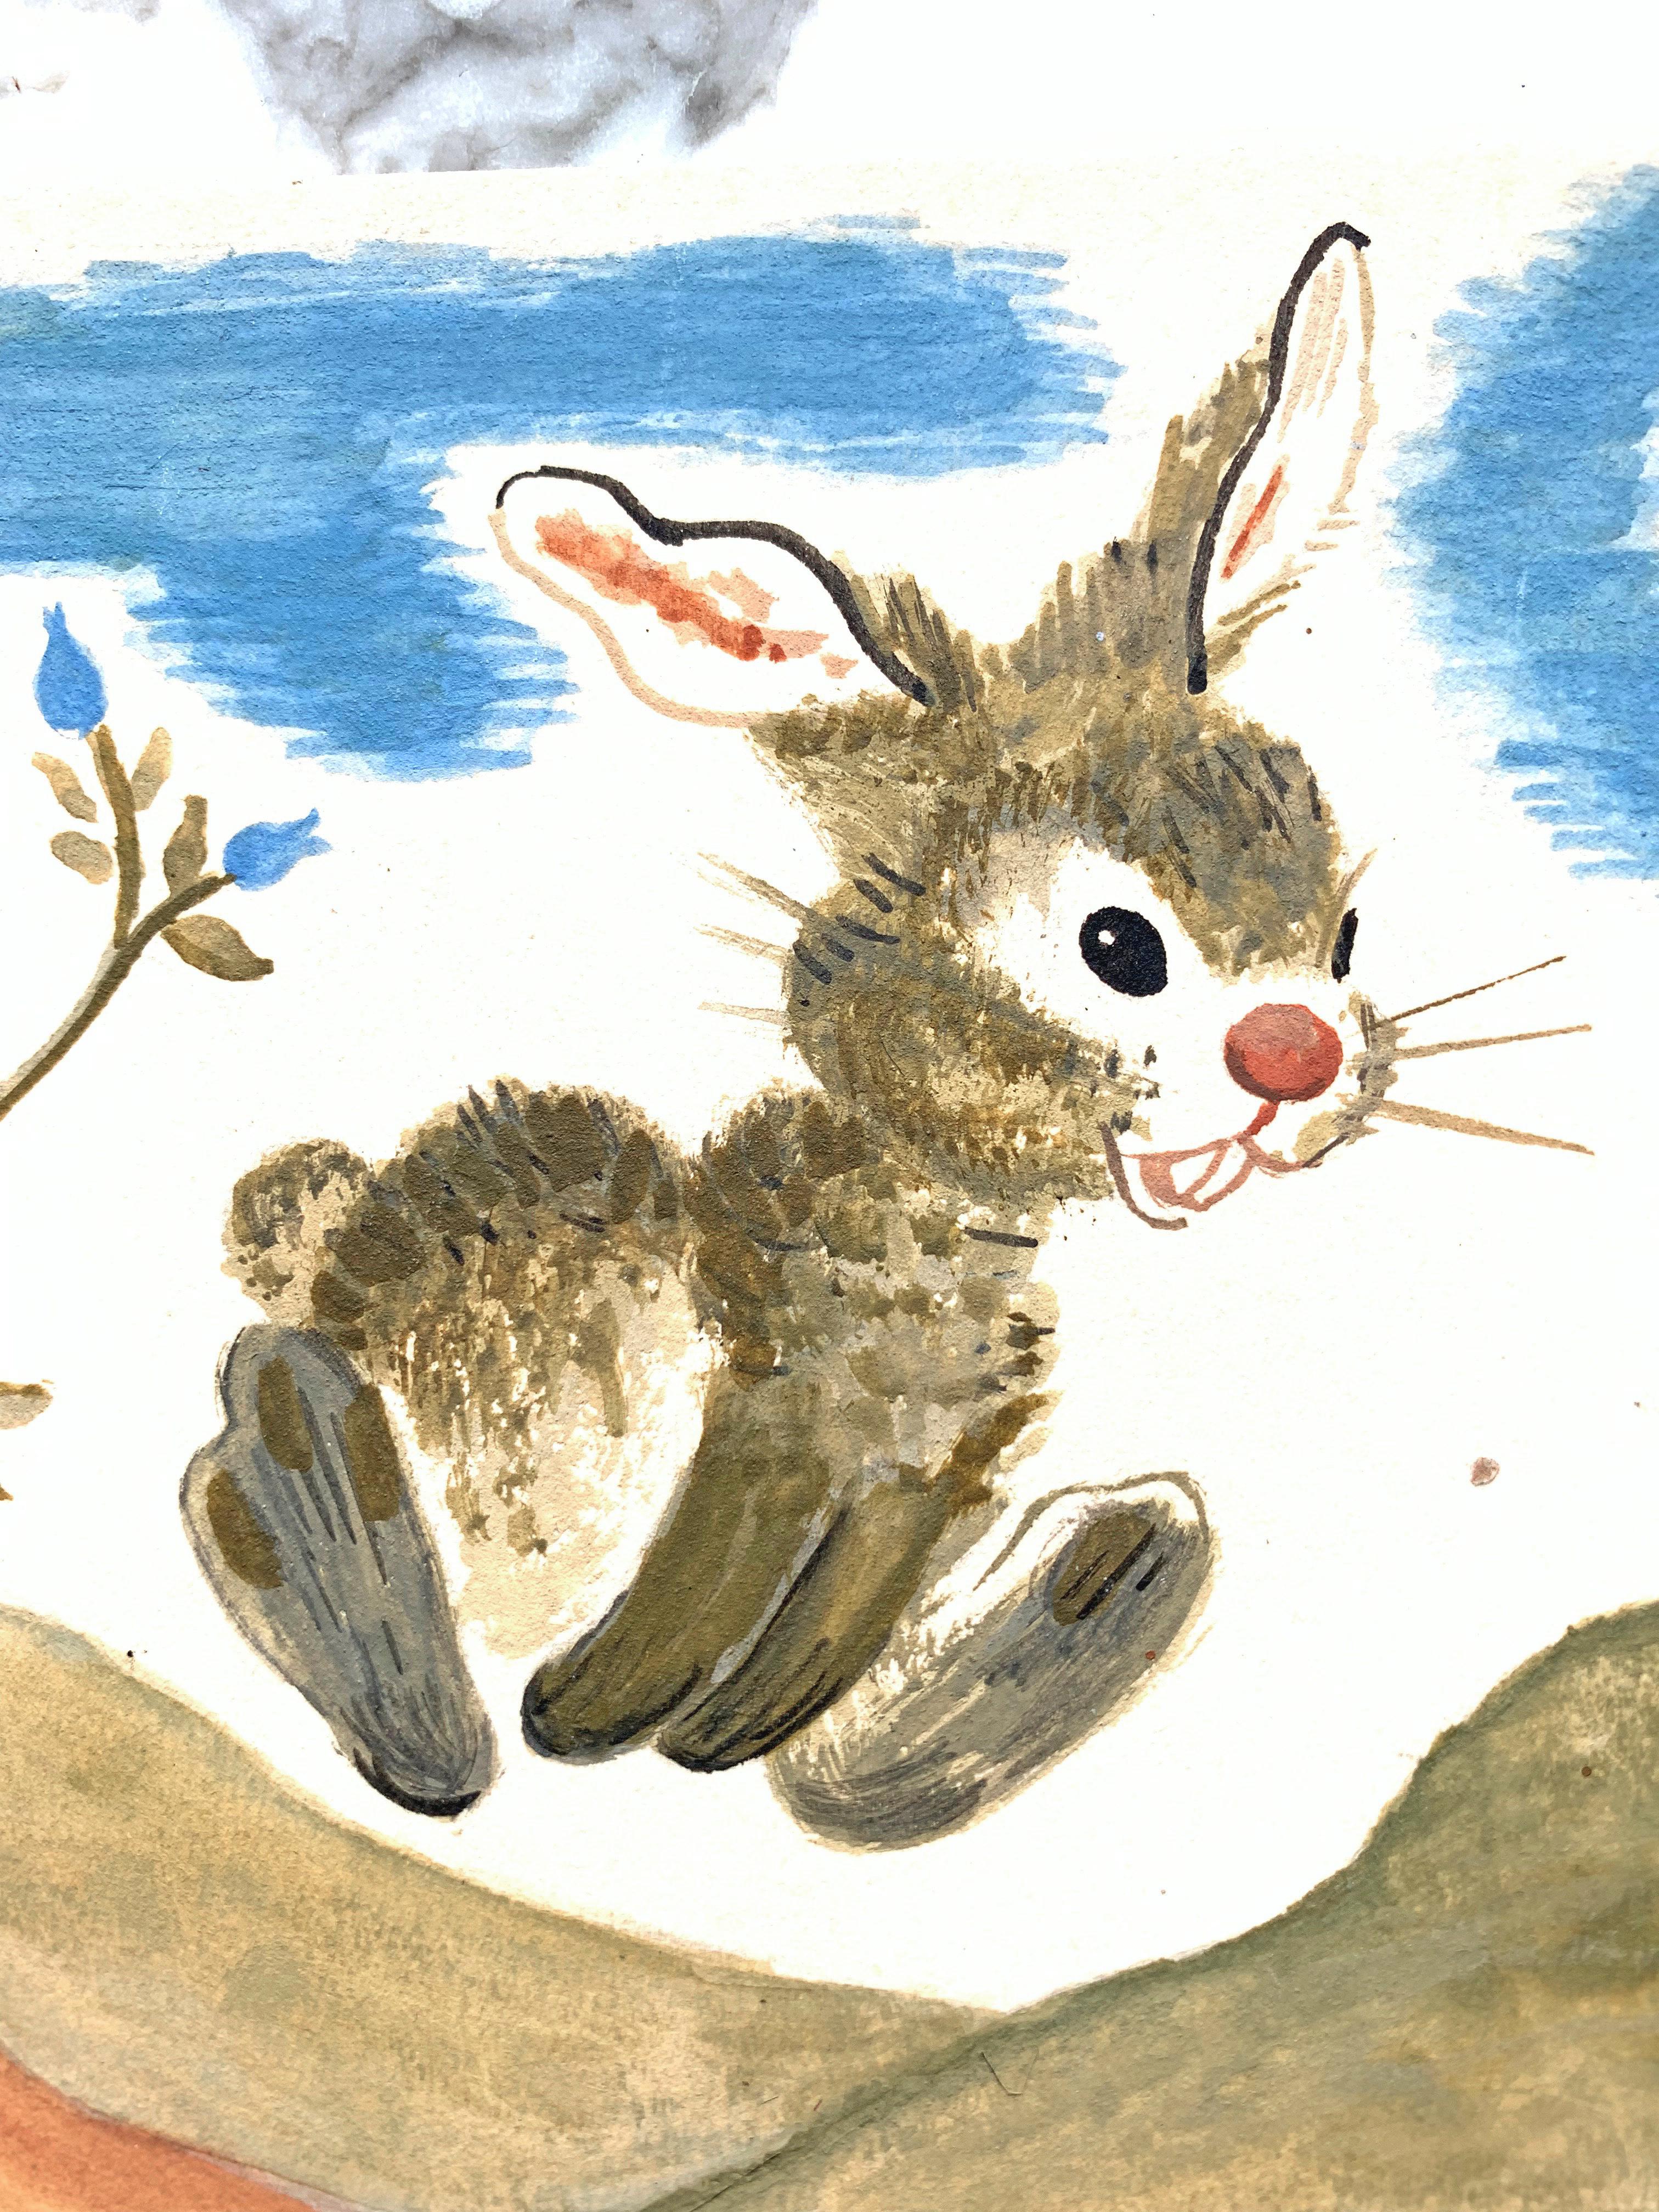 Absolutely winning and full of charm, this book illustration depicts a bunny rabbit running across the land, the hilly landscape rich with browns and greens, and the sky a perfect blue. Painted in gouache on illustration board, the Sphinx mark --